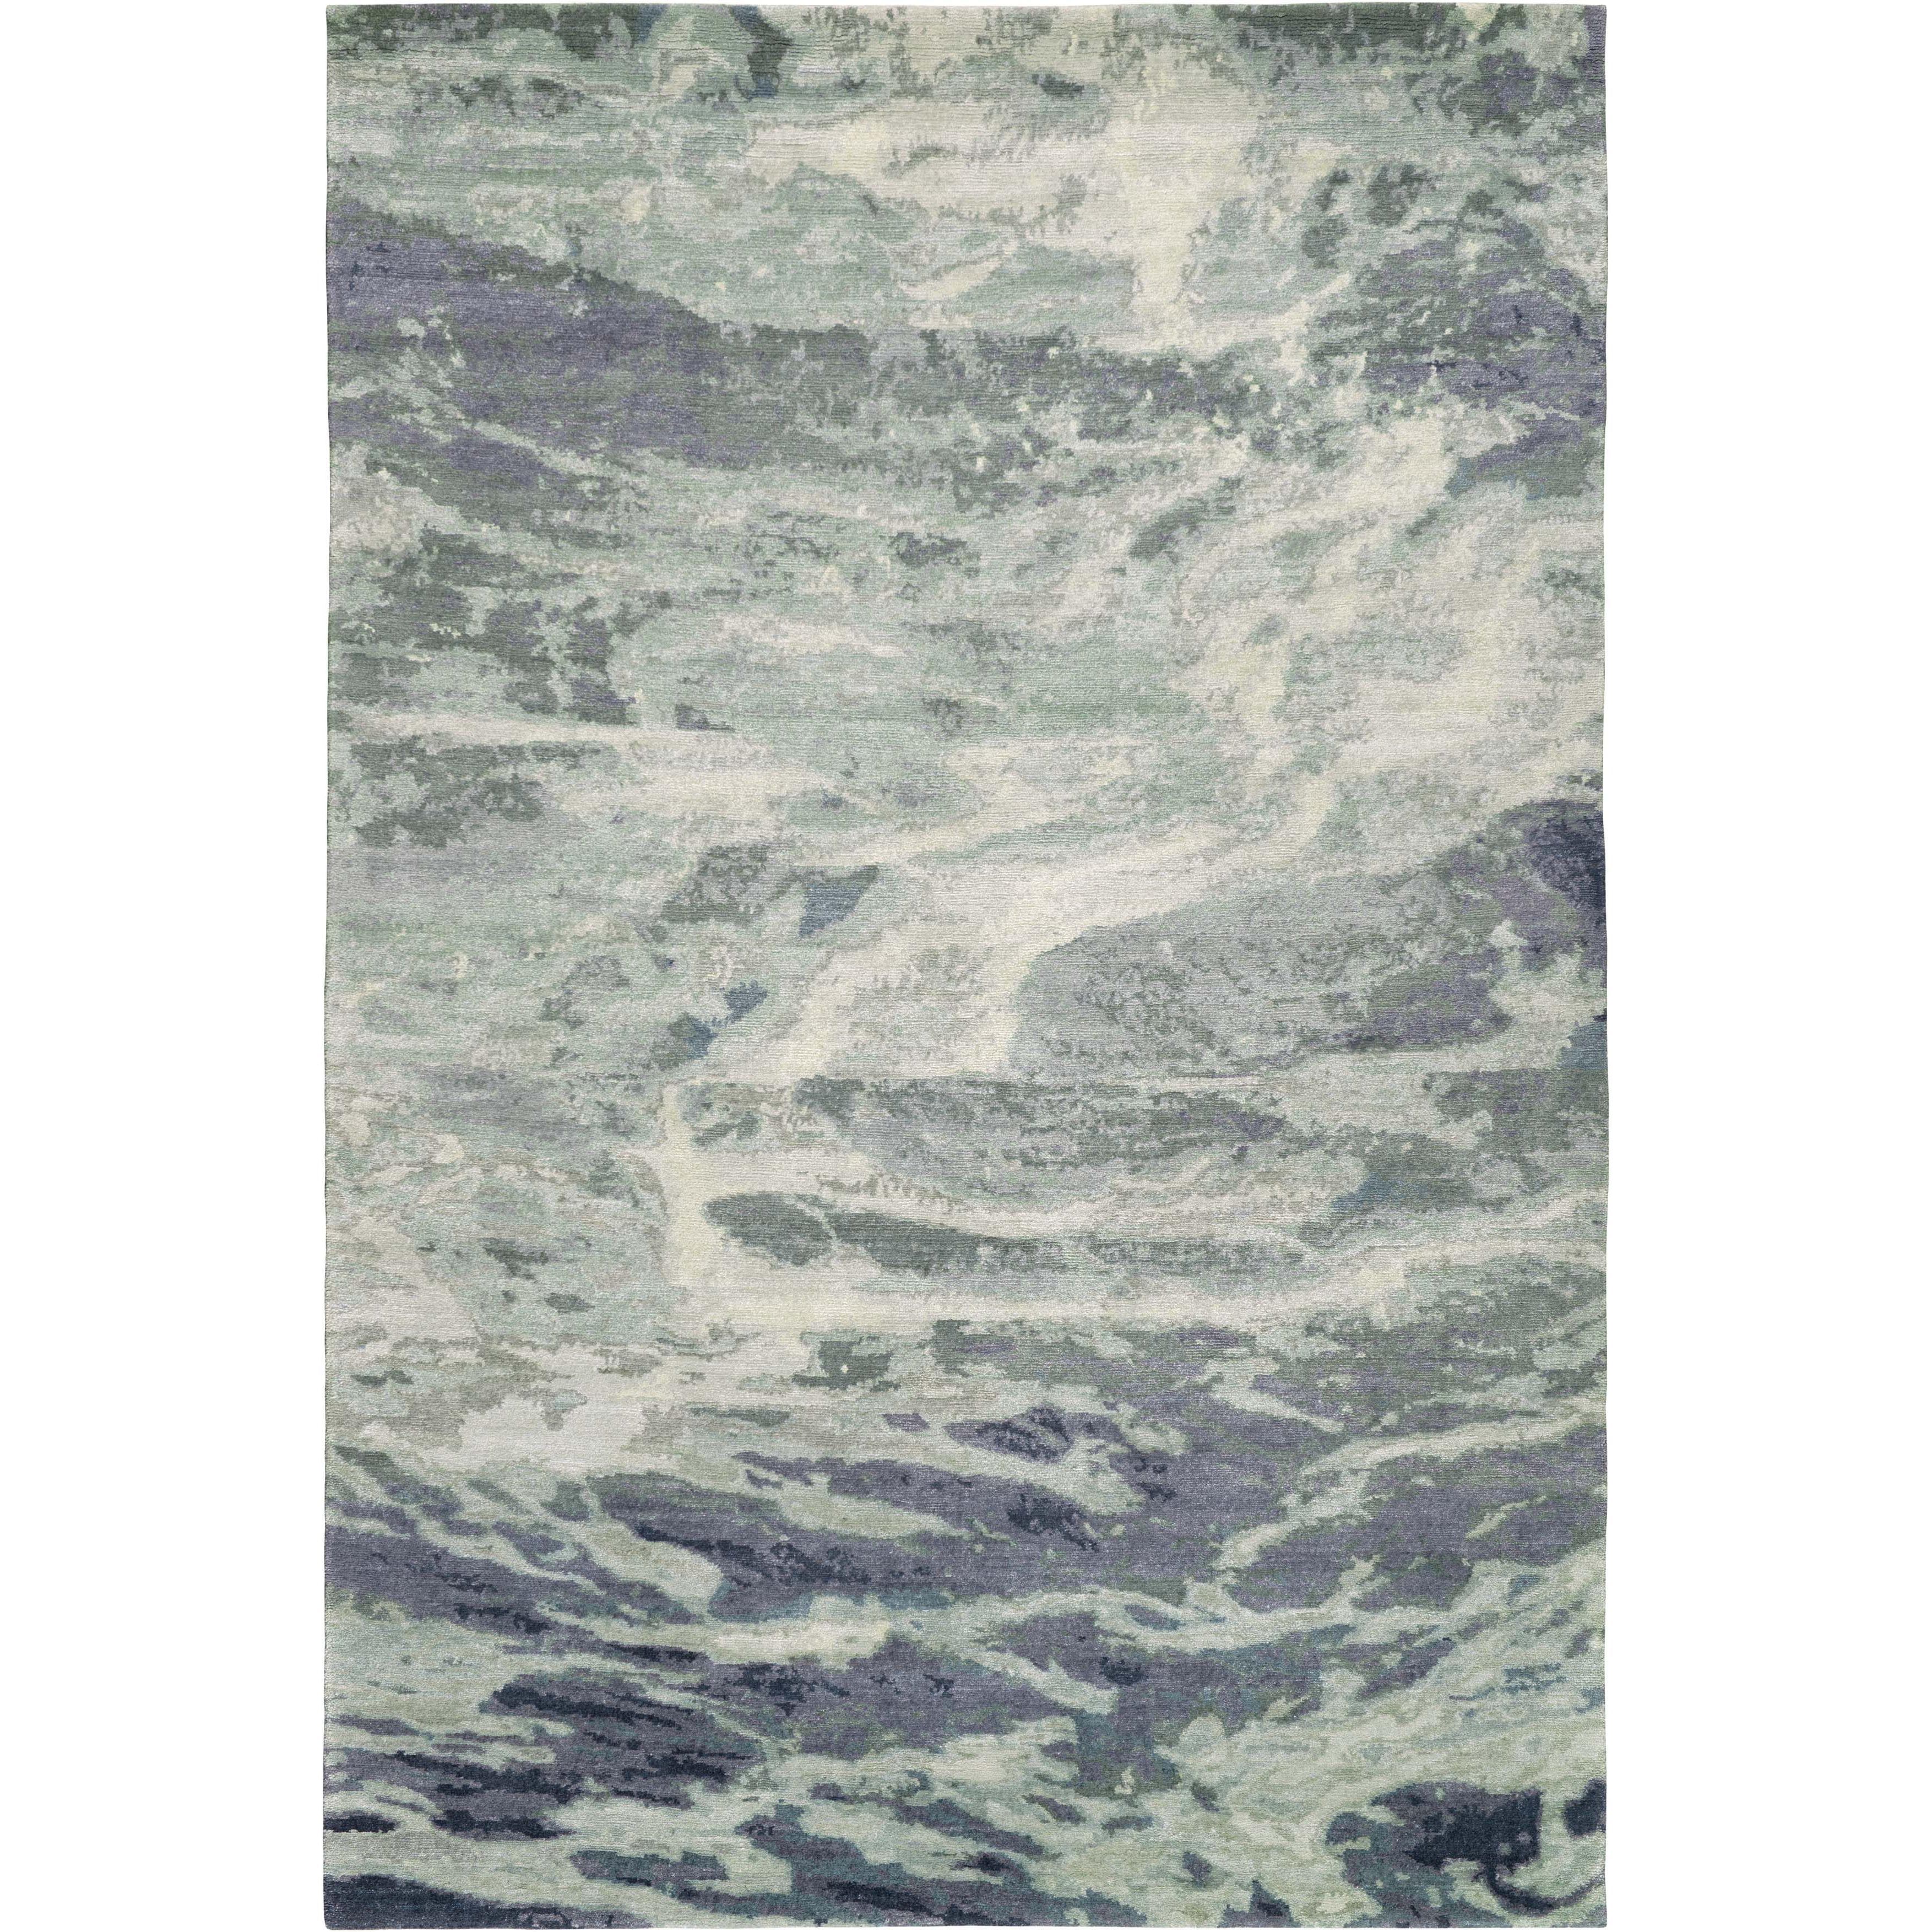 Oceanic Handcrafted 10x8 Rug in Wool by The Rug Company